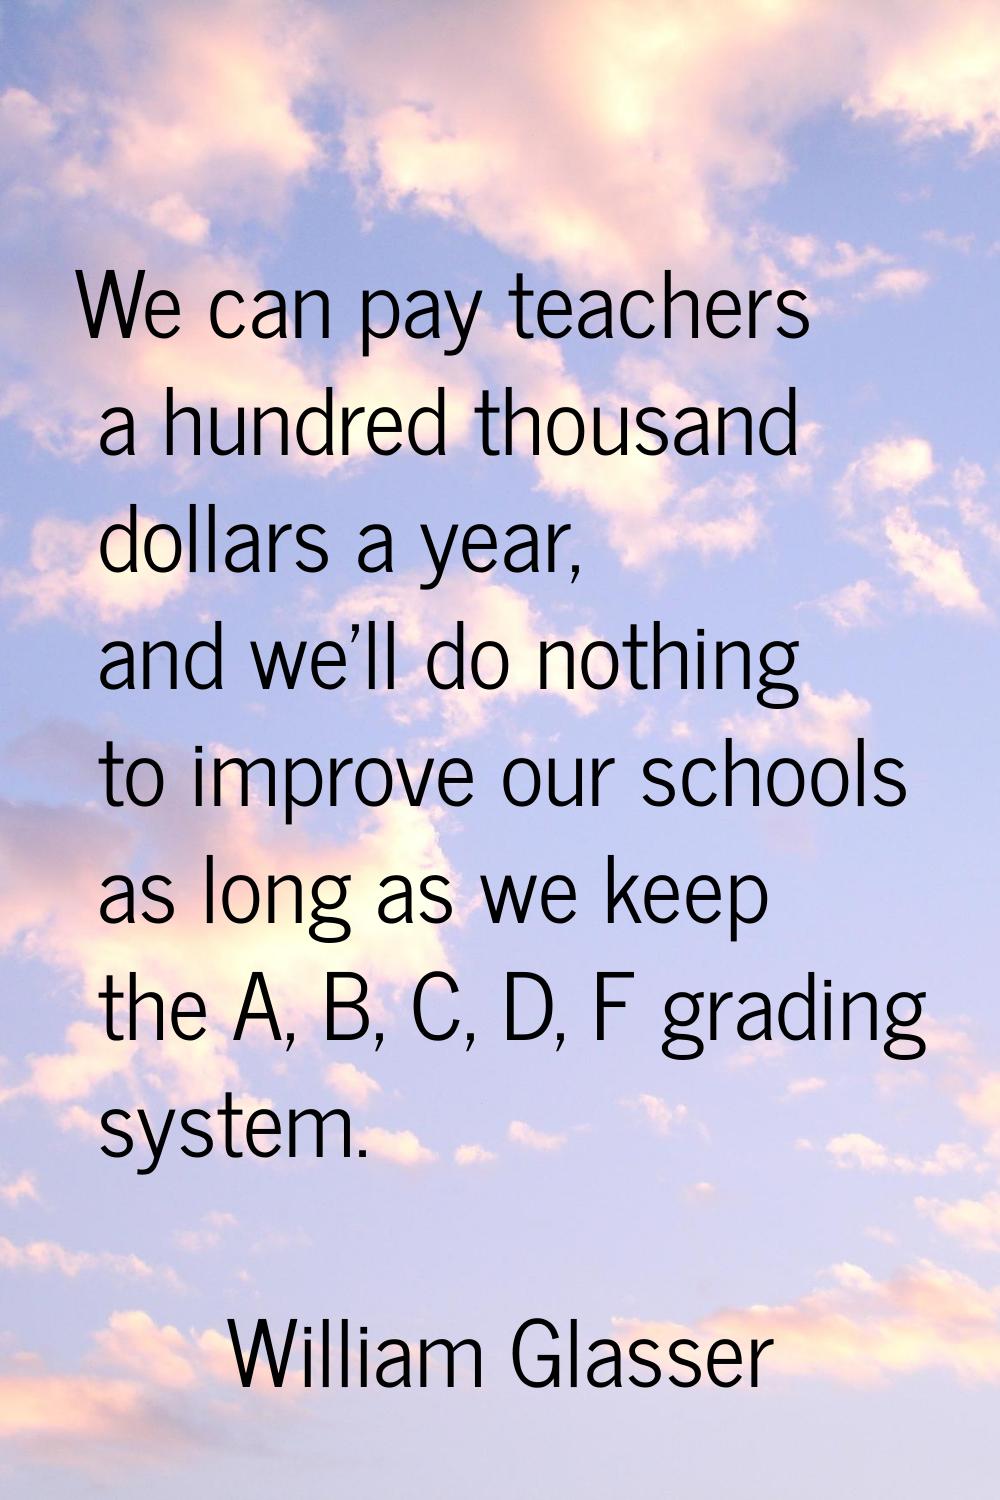 We can pay teachers a hundred thousand dollars a year, and we'll do nothing to improve our schools 